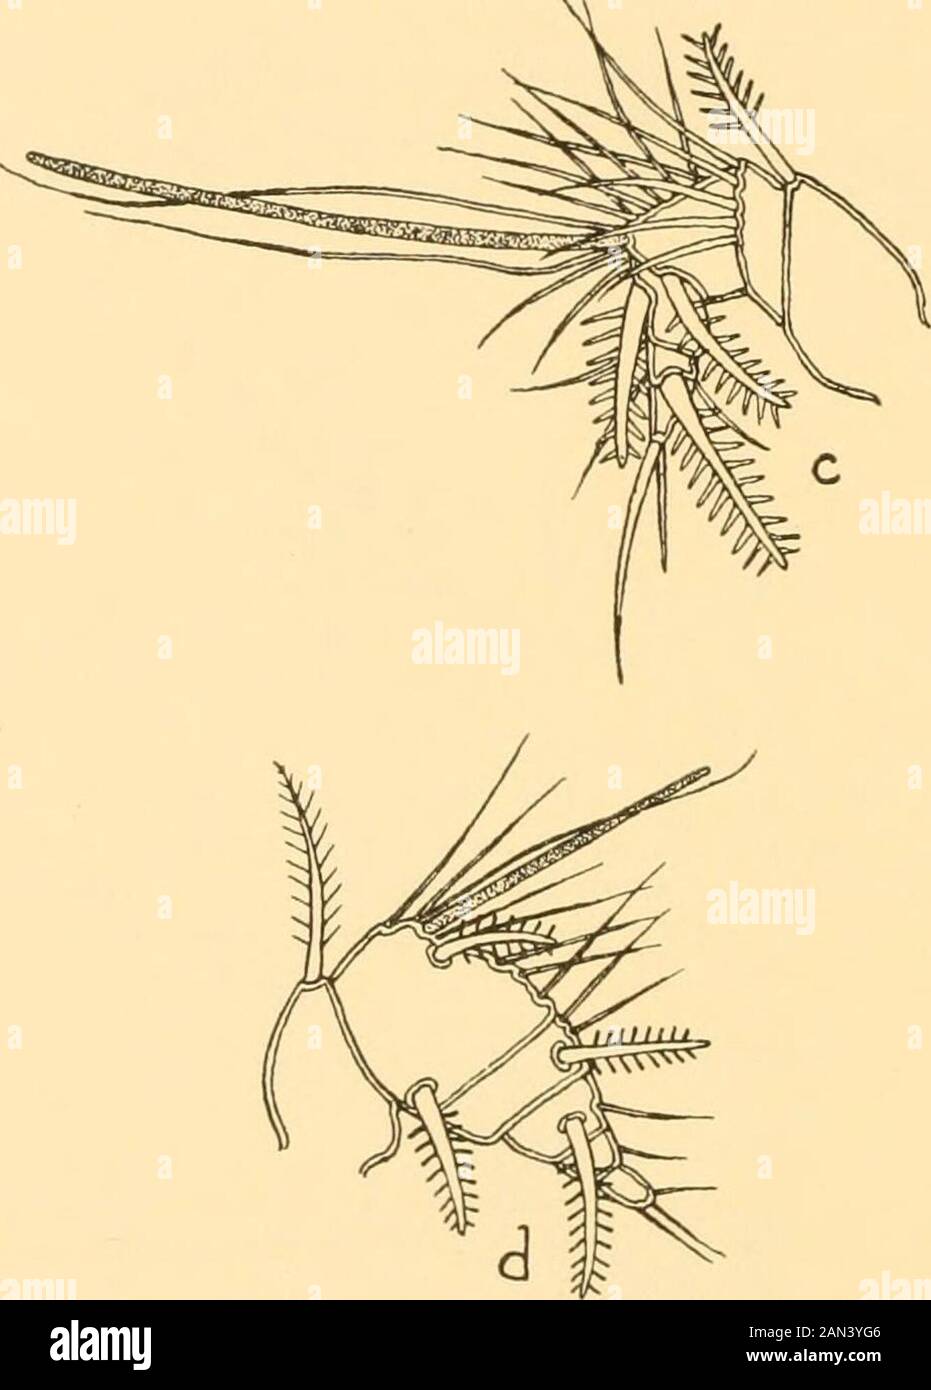 Smithsonian miscellaneous collections . owing an exceptional increasein the number of aesthetasks. ally carries a single sensory club or aesthetask on each of the firstantennae. In these terraqueous copepods the size and length of theaesthetasks may be considerably increased, as happens more oftenin the males (fig. 3). In the females either the number of aesthetasksis multiplied as in figure 4, or they are supplemented by thick finger- 8 SMITHSONIAN MISCELLANEOUS COLLECTIONS VOL. 94 like processes, carrying along one or both sides a row of coarse spinesas in figure 5. There are sometimes six o Stock Photo